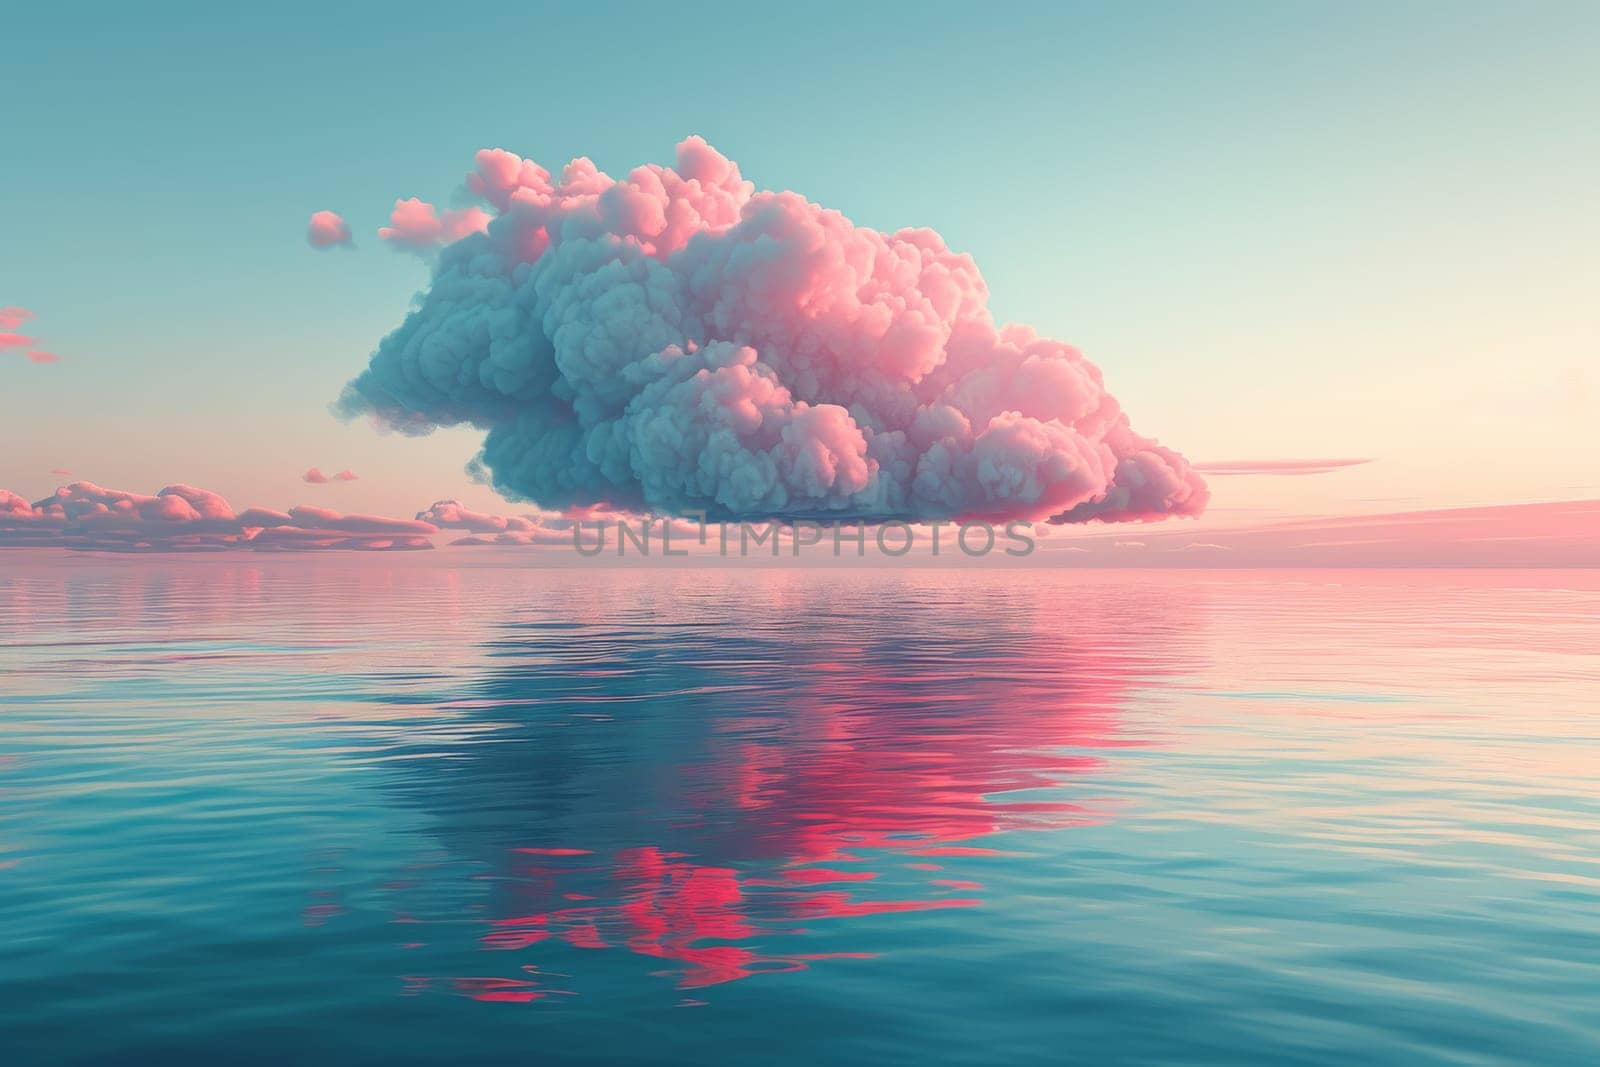 A large pink cloud is floating over the ocean. The sky is a beautiful shade of blue. The water is calm and still